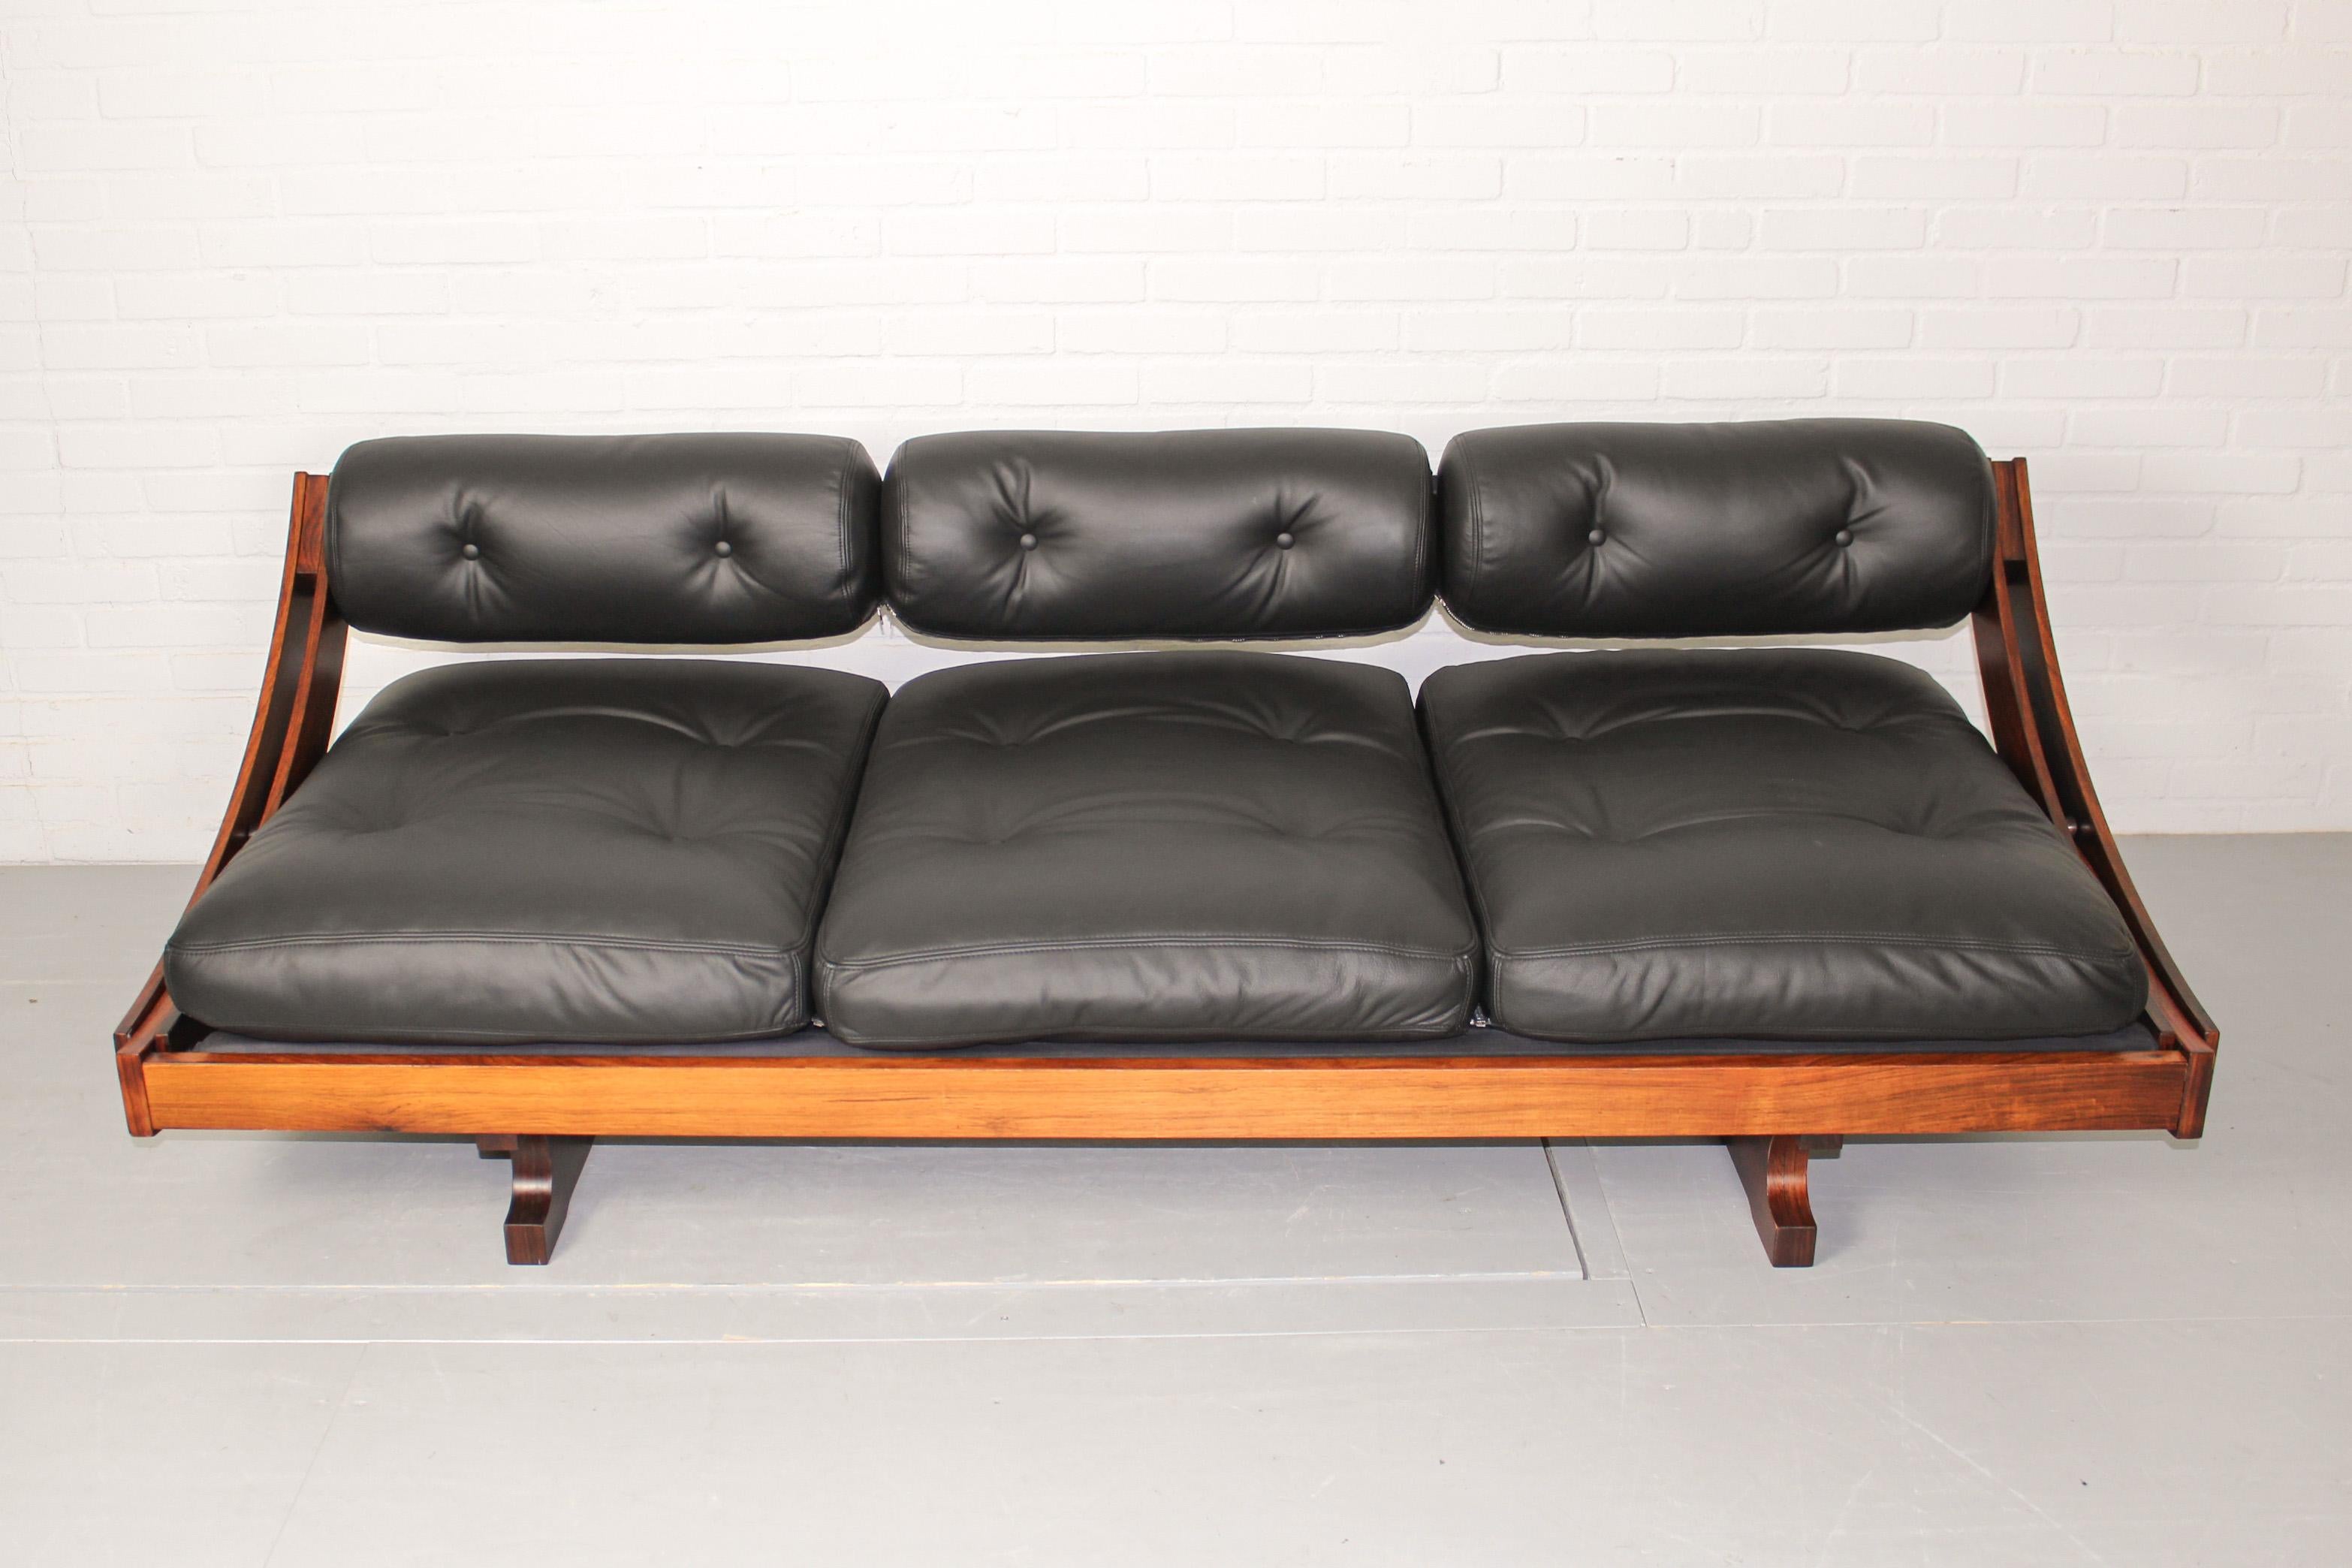 Italian Rosewood Daybed Sofa GS 195 by Gianni Songia for Sormani in New Black Leather